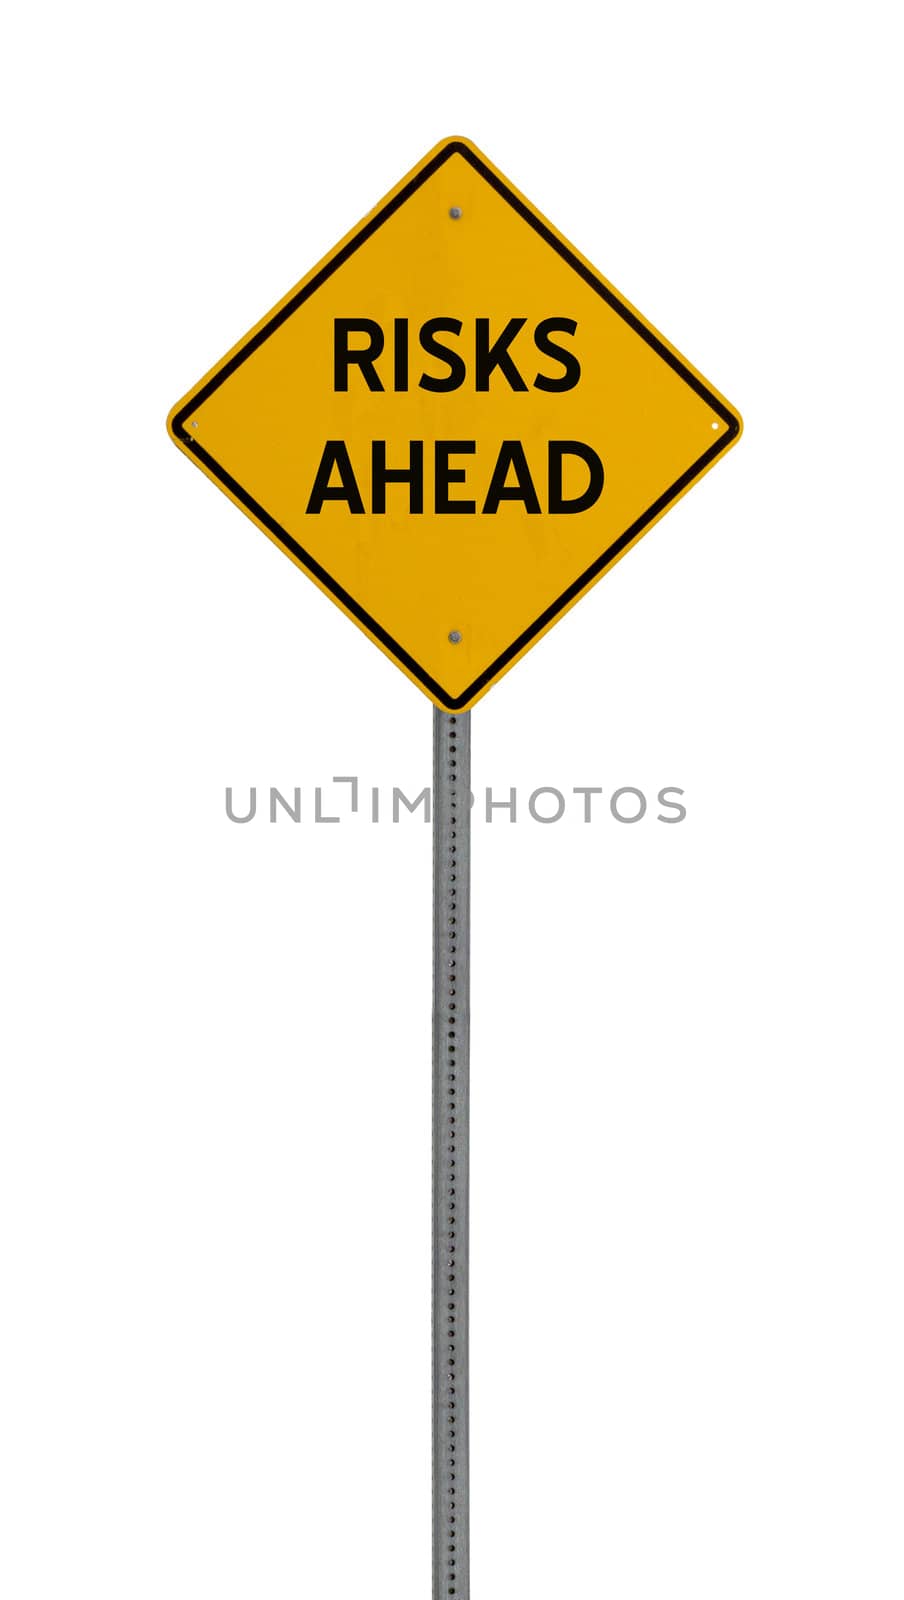  risk ahead - Yellow road warning sign by jeremywhat